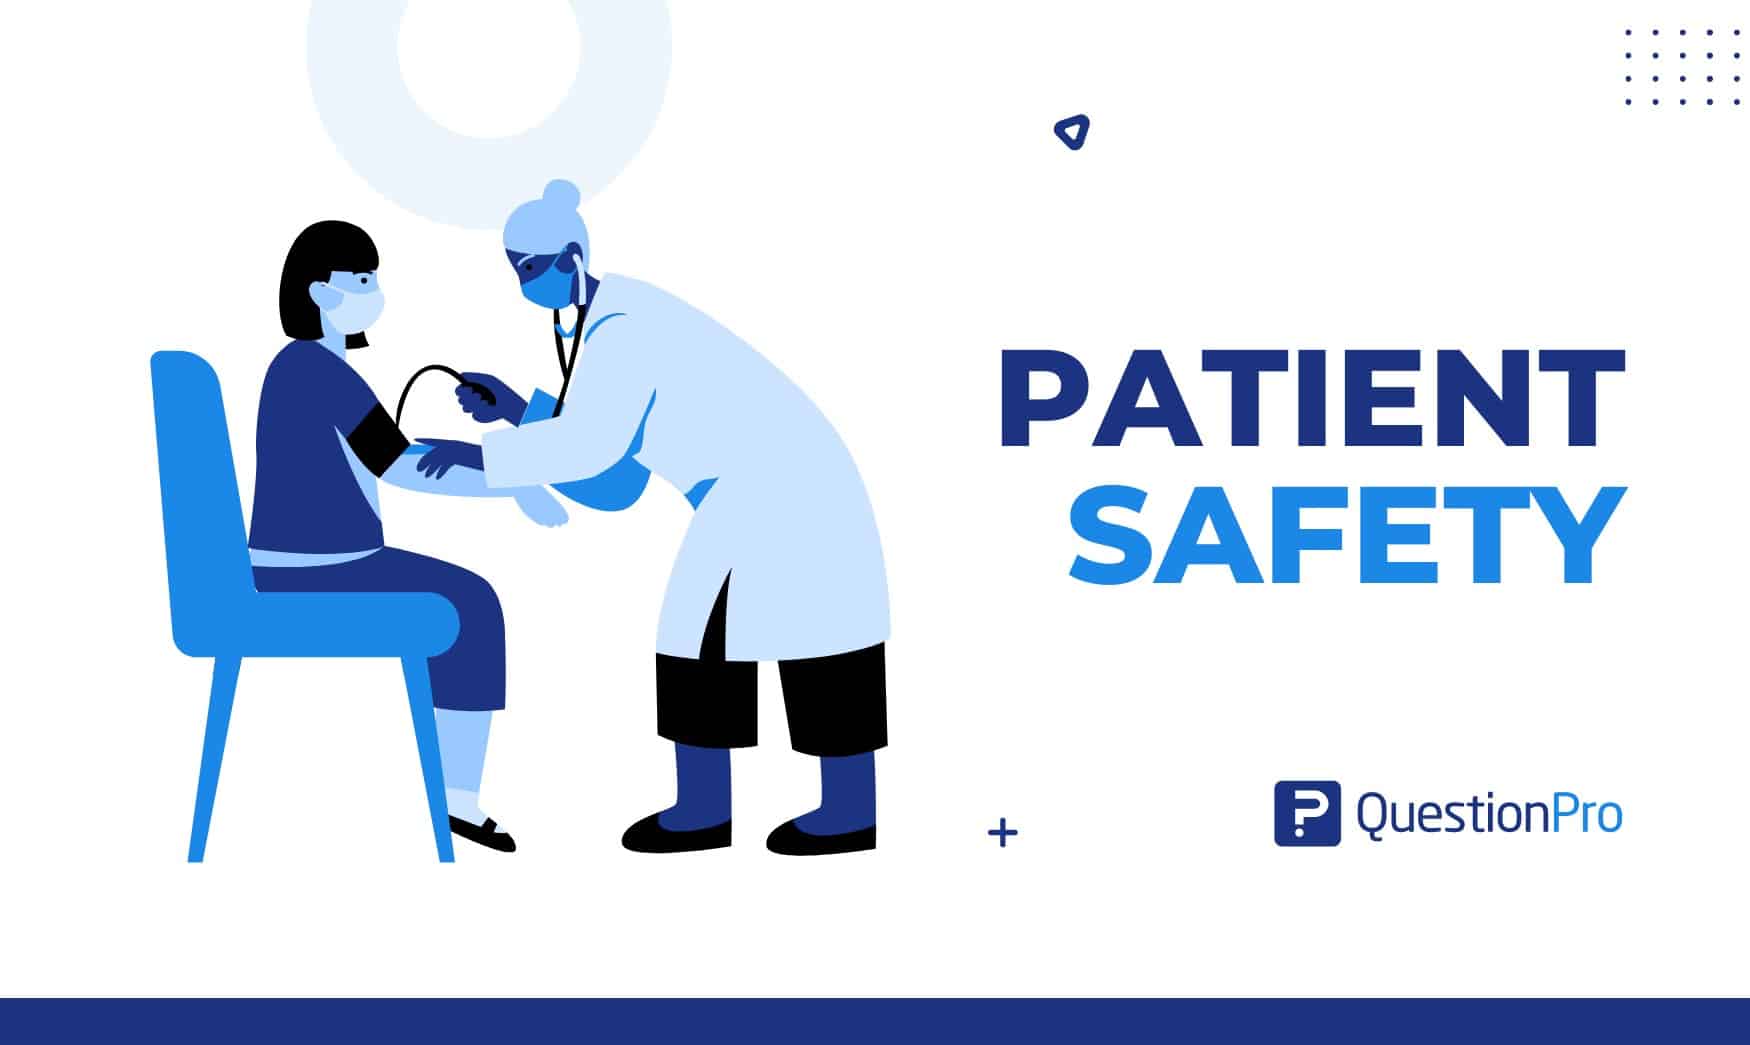 Patient safety means reducing healthcare-related harm. Explore its importance and get tips for hospitals to create a patient safety culture.